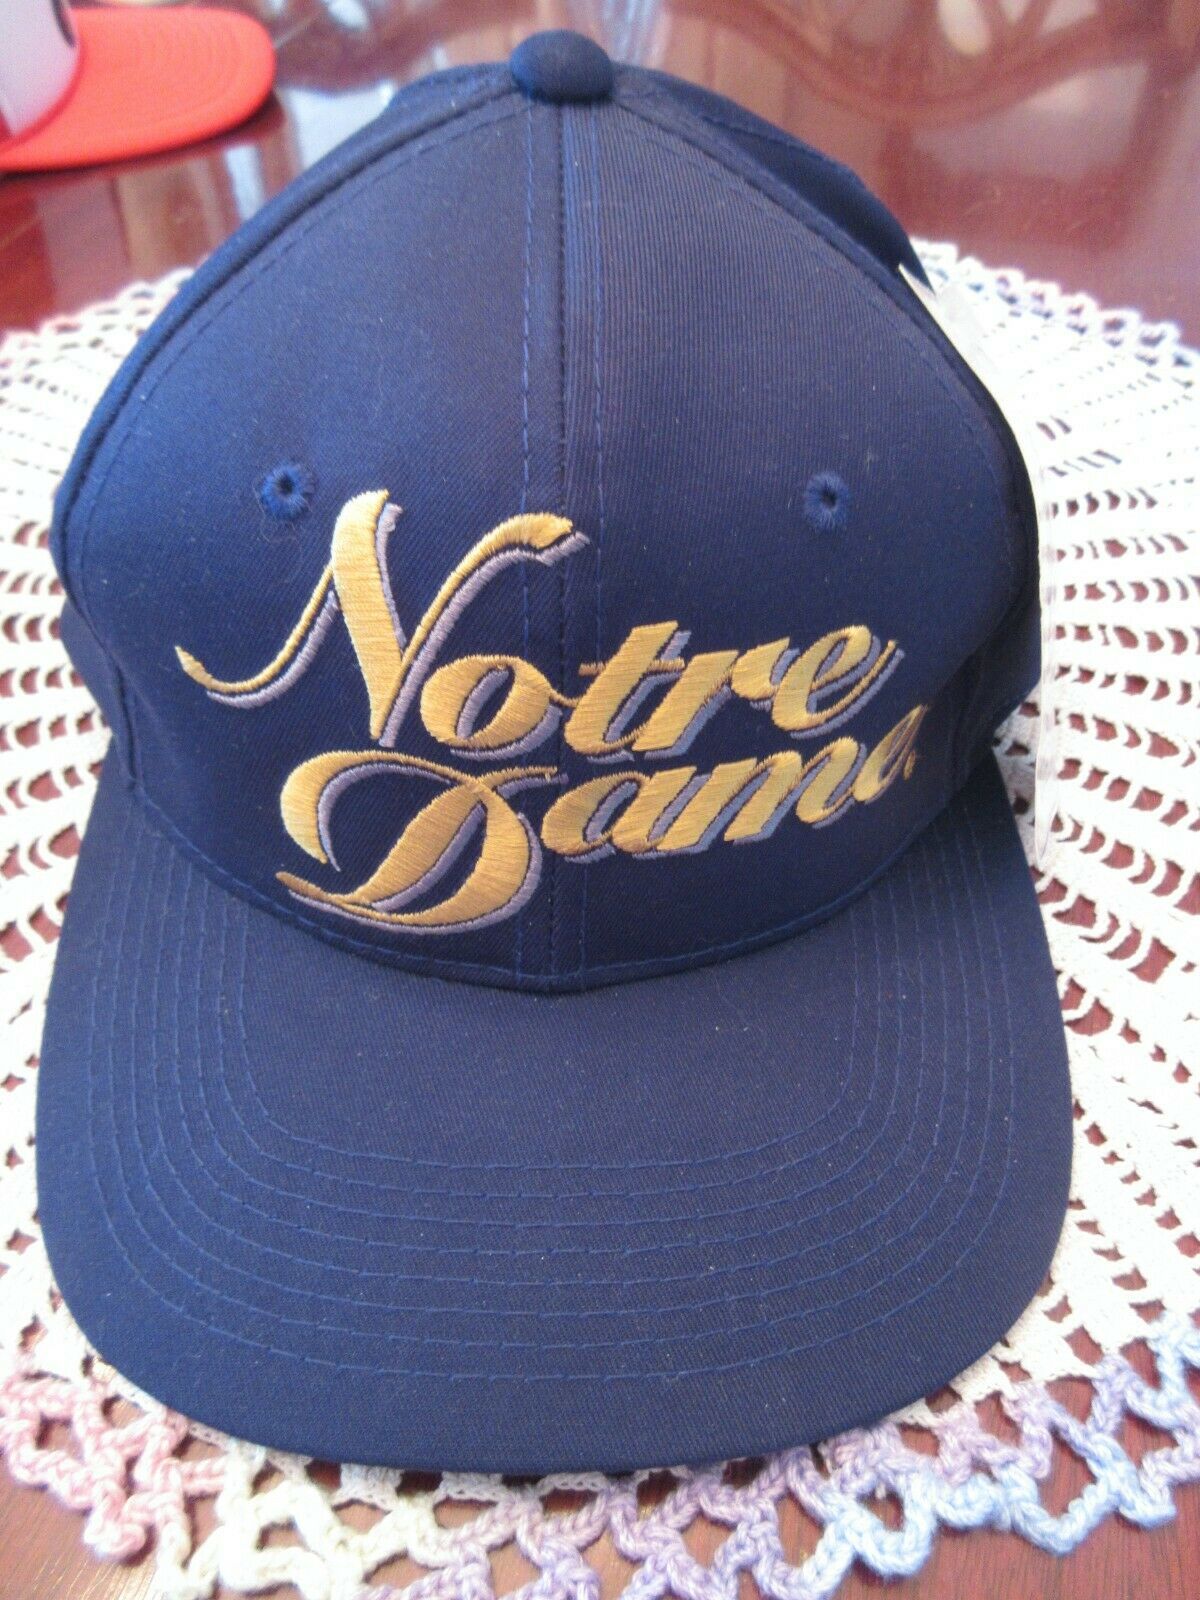 Vintage Notre Dame Fighting Irish Navy Cap Hat Officially Licensed New Tag Rare - $89.95